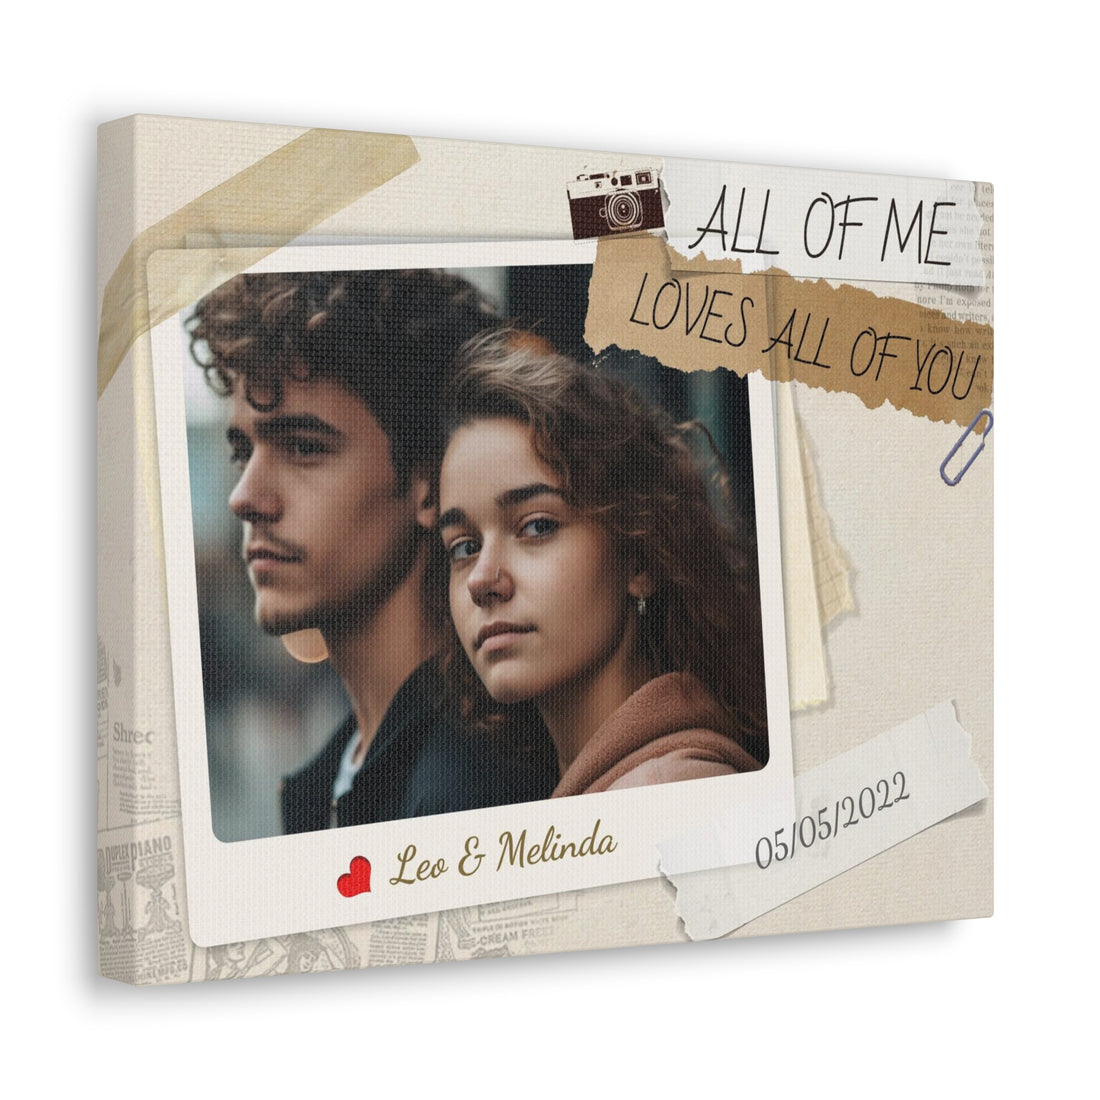 All Of Me Loves All Of You, Photo - Personalized Photo Canvas Print Anniversary Gifts